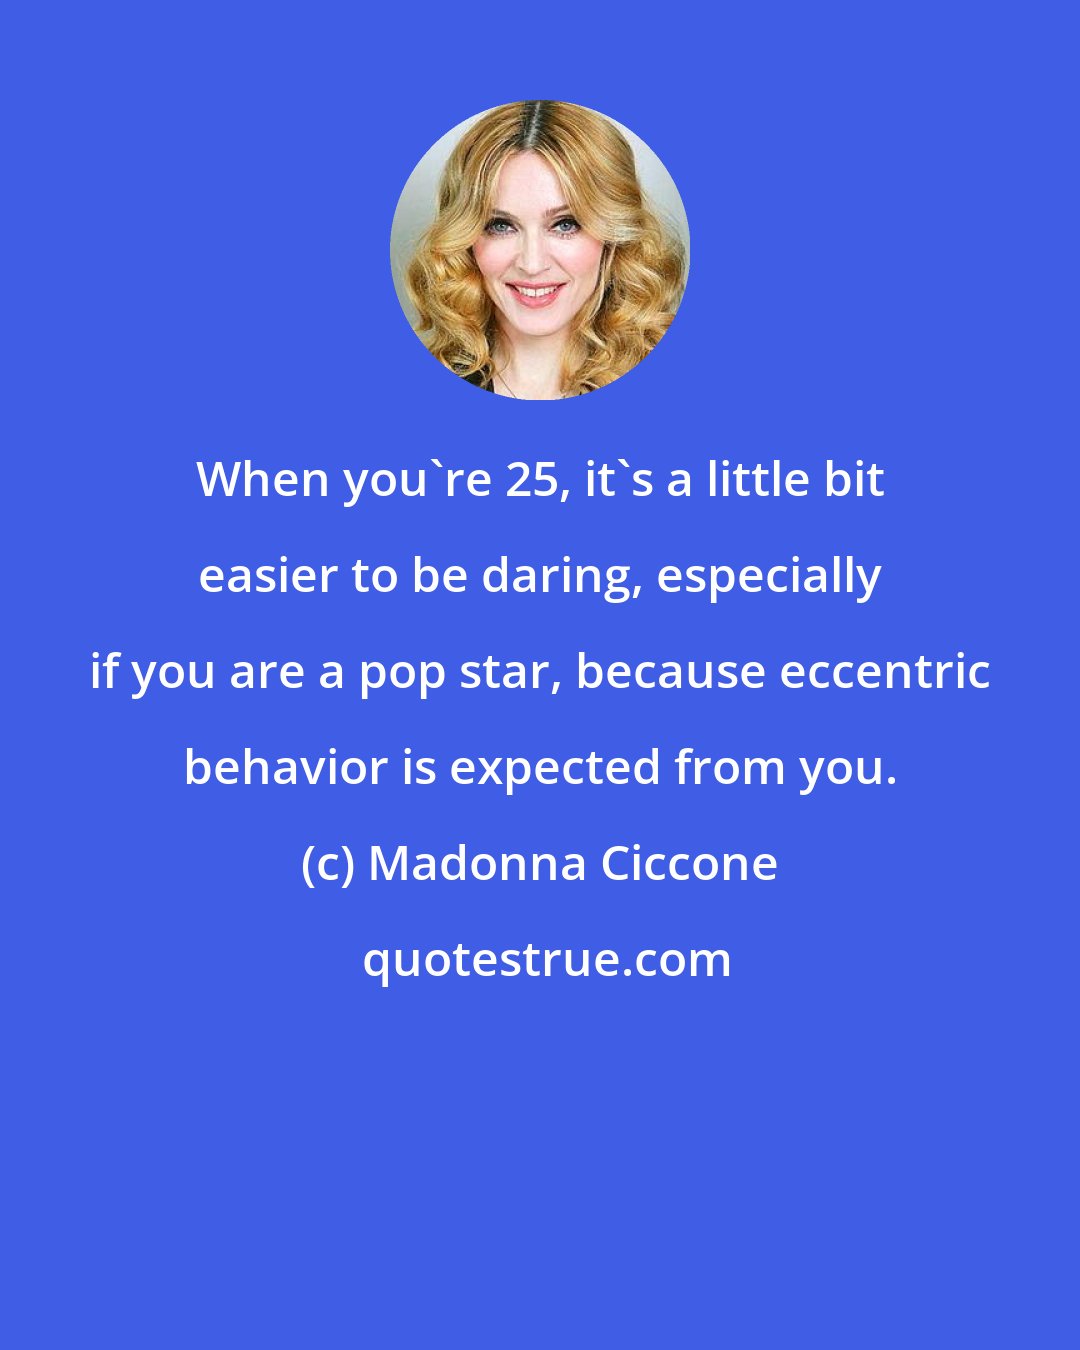 Madonna Ciccone: When you're 25, it's a little bit easier to be daring, especially if you are a pop star, because eccentric behavior is expected from you.